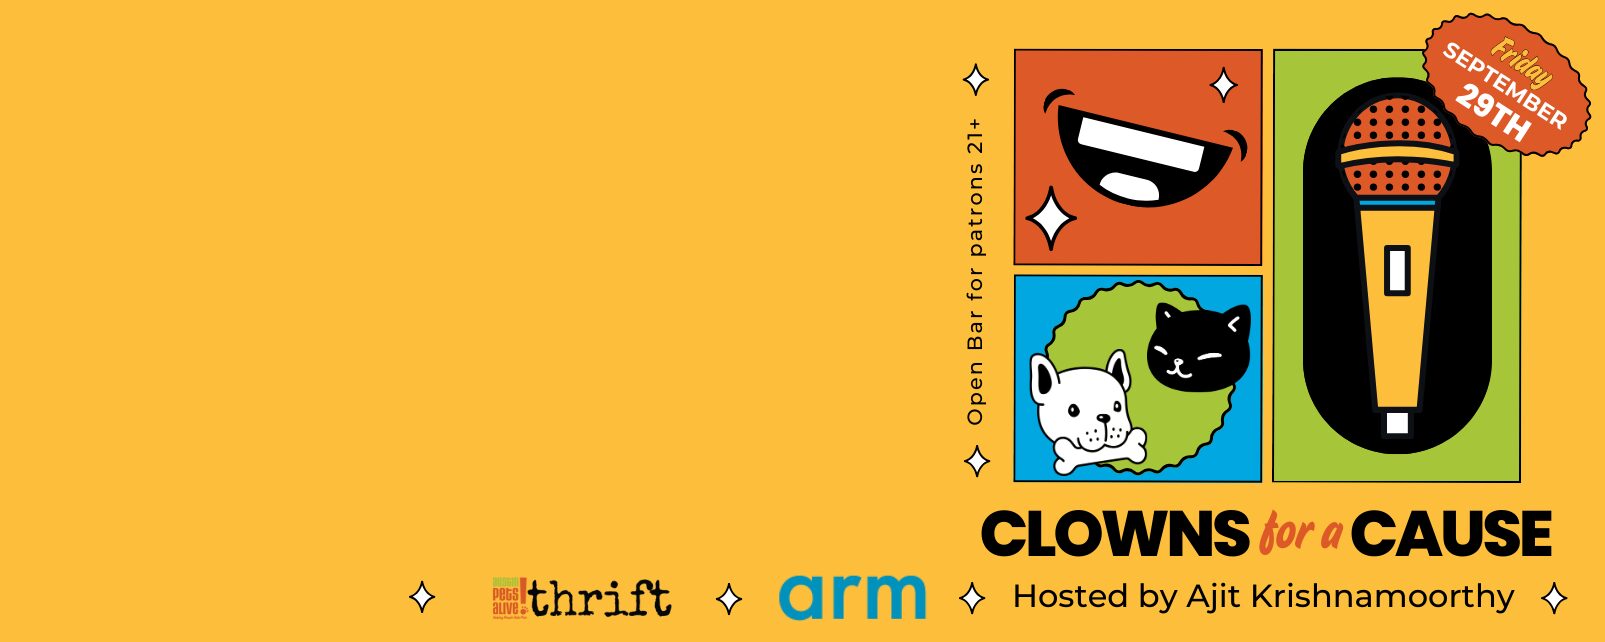 Clowns for a Cause Web Banner